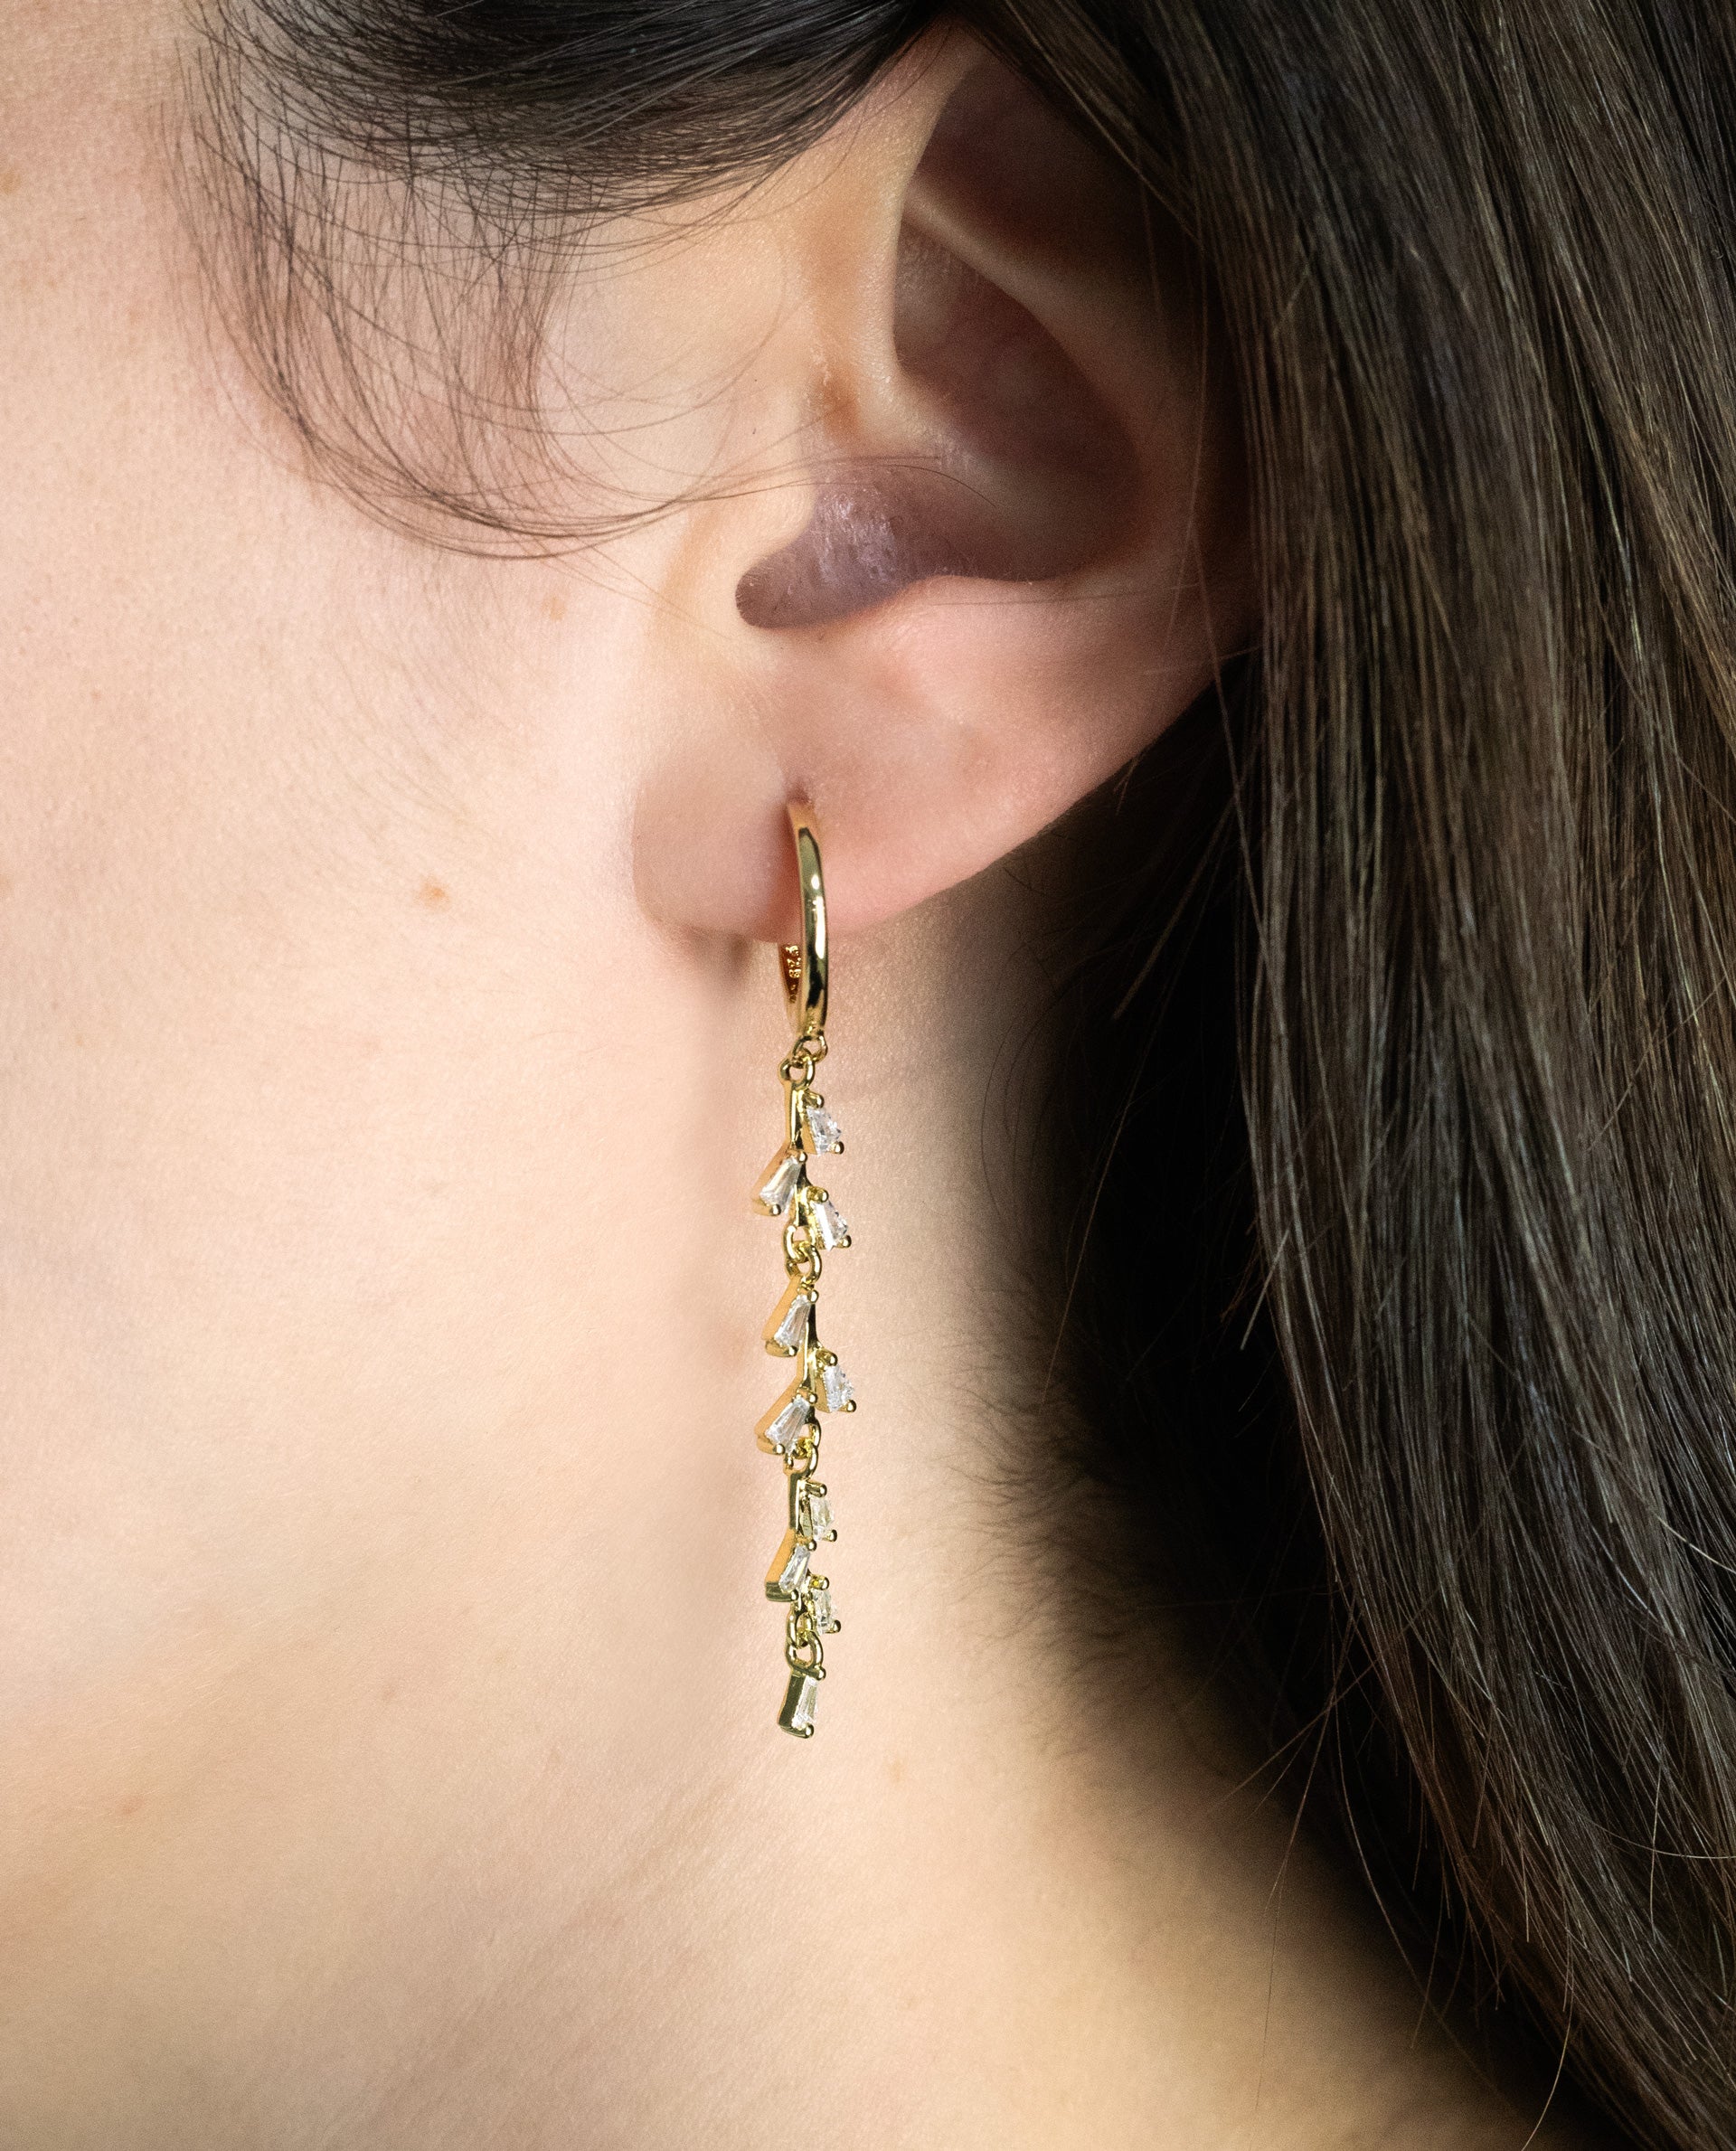 SHINY LEAVES EARRINGS - GOLD PLATED SILVER